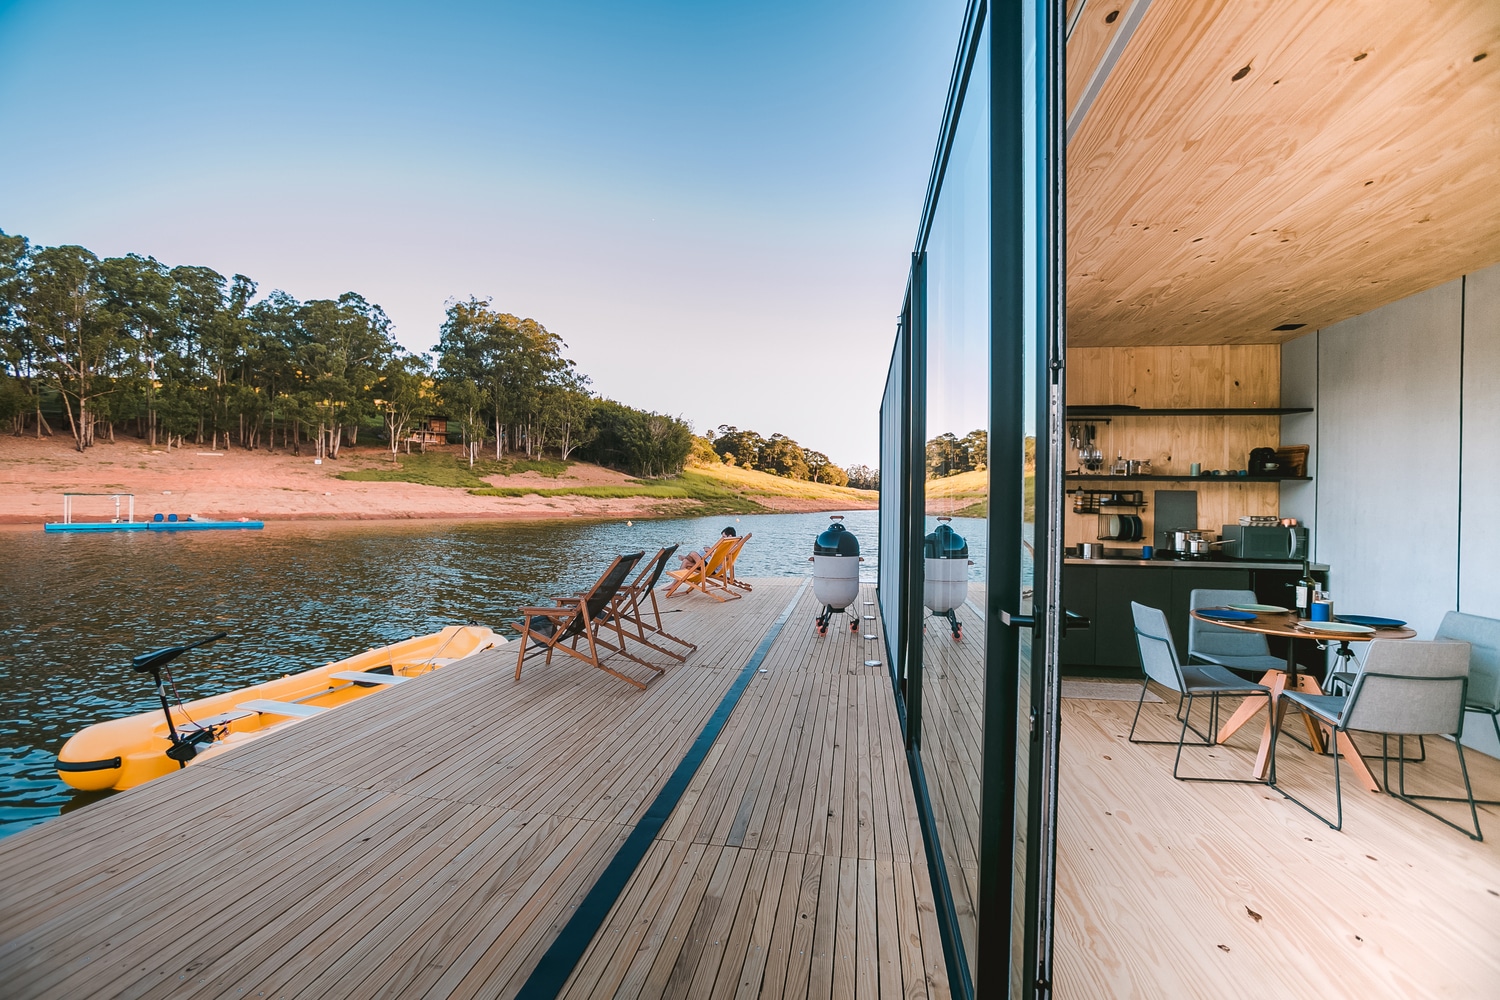 LilliHaus: The Floating Cabins Designed For Off-The-Grid Living